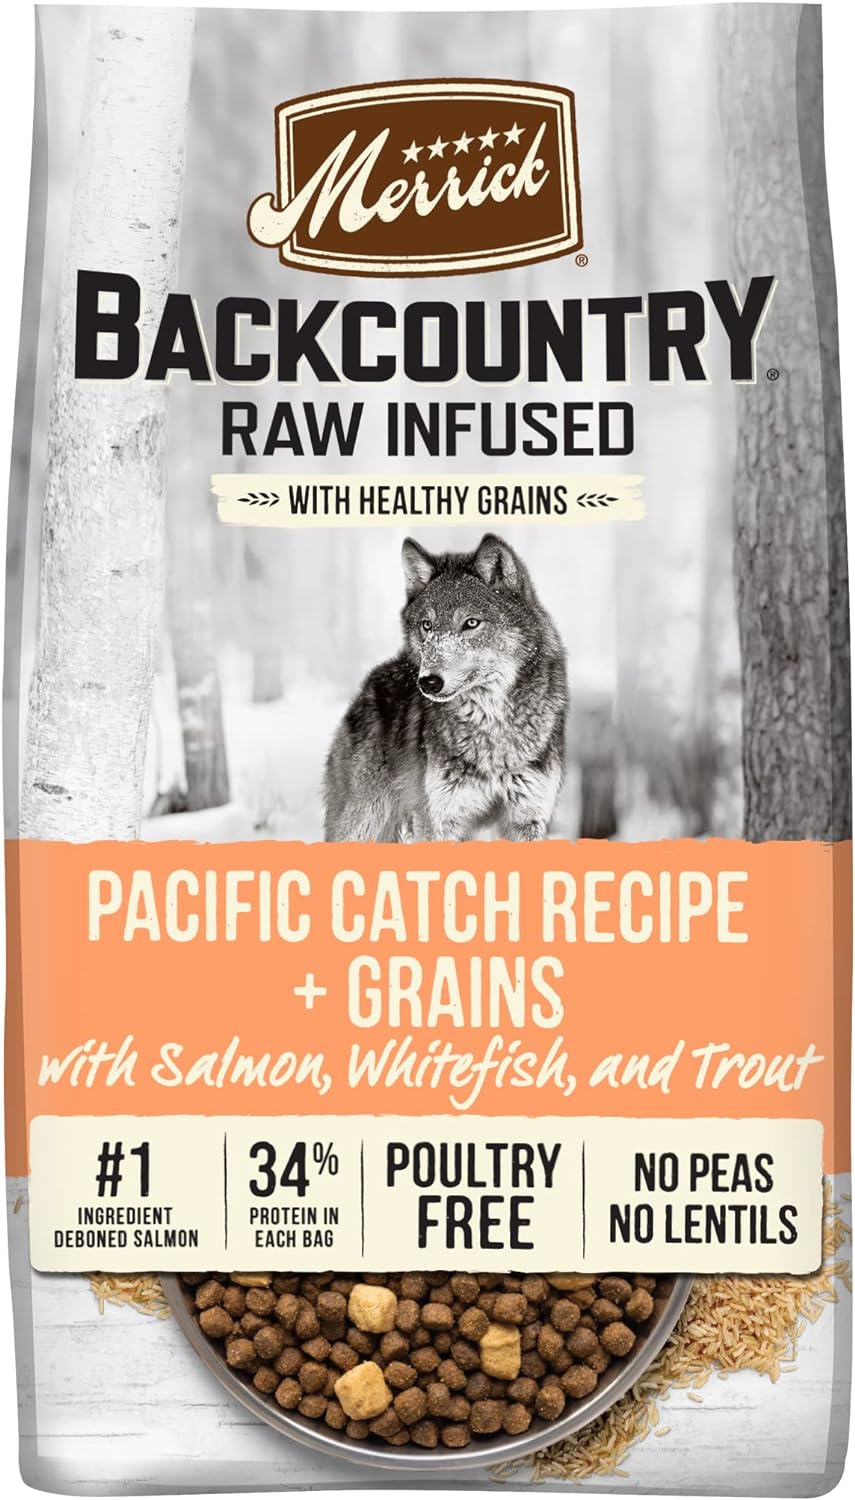 Merrick Backcountry Raw Infused Pacific Catch Recipe + Grains Dry Dog Food – Gallery Image 1